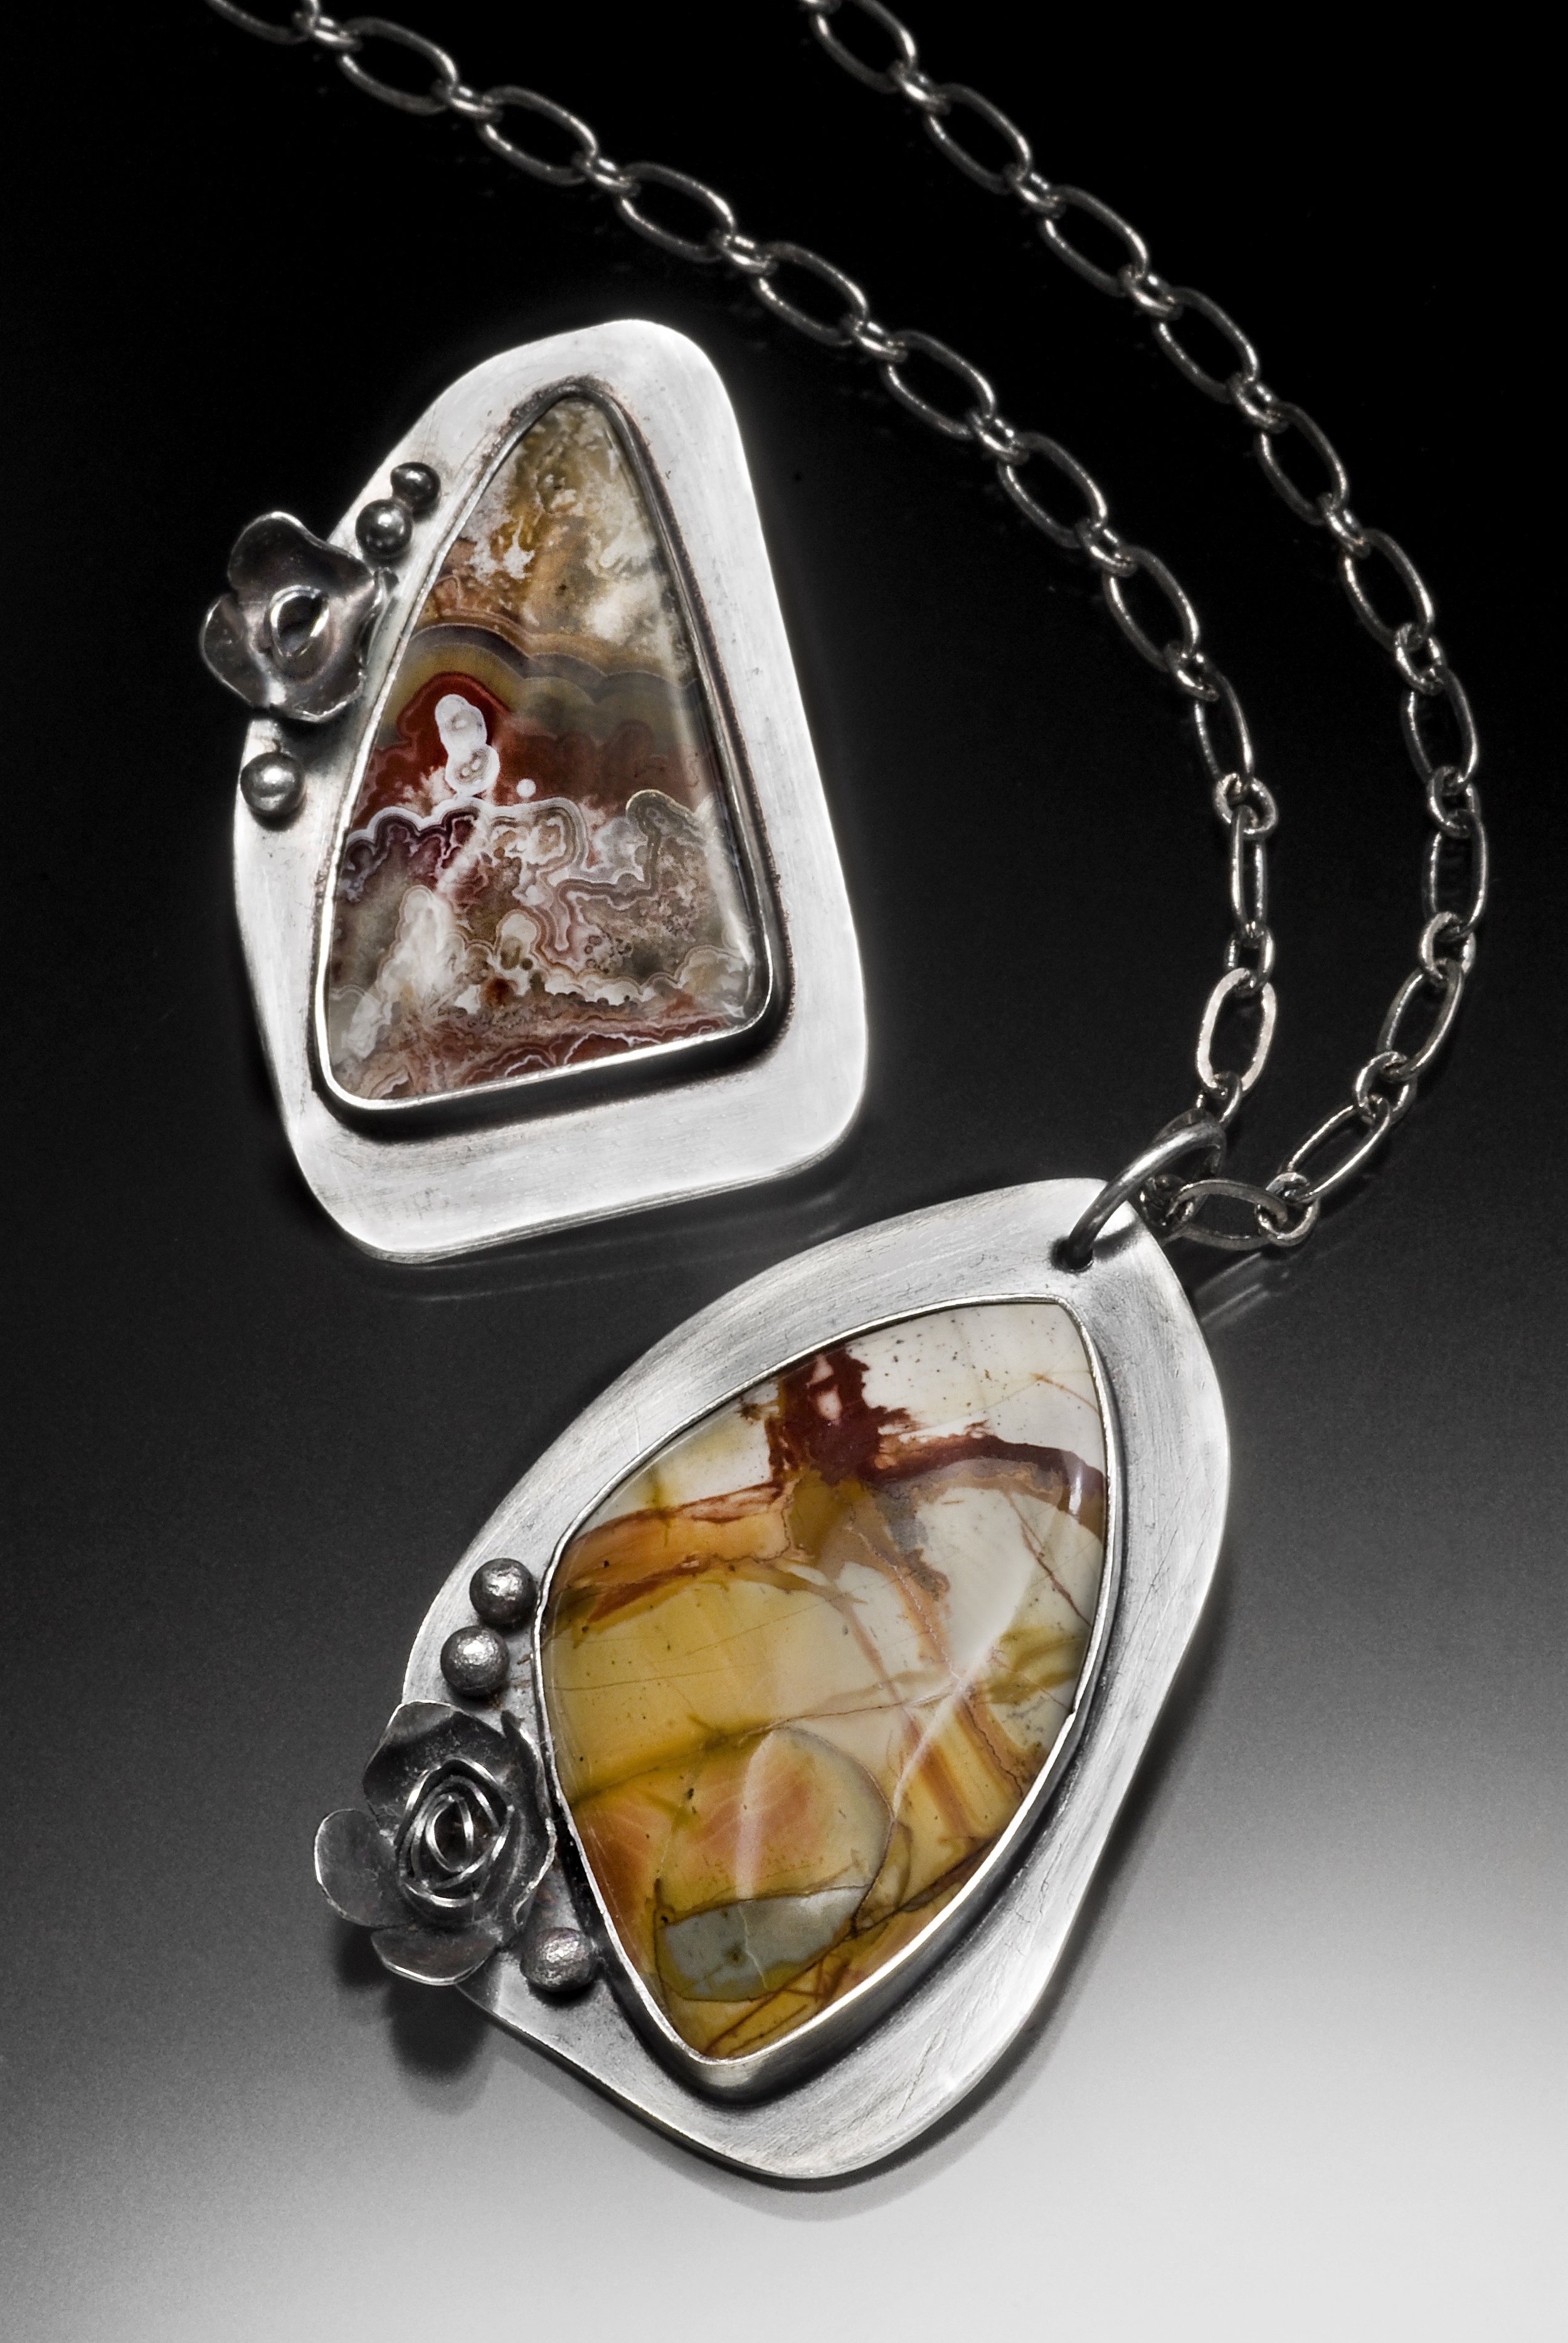 Pair of pendants with rose decoration